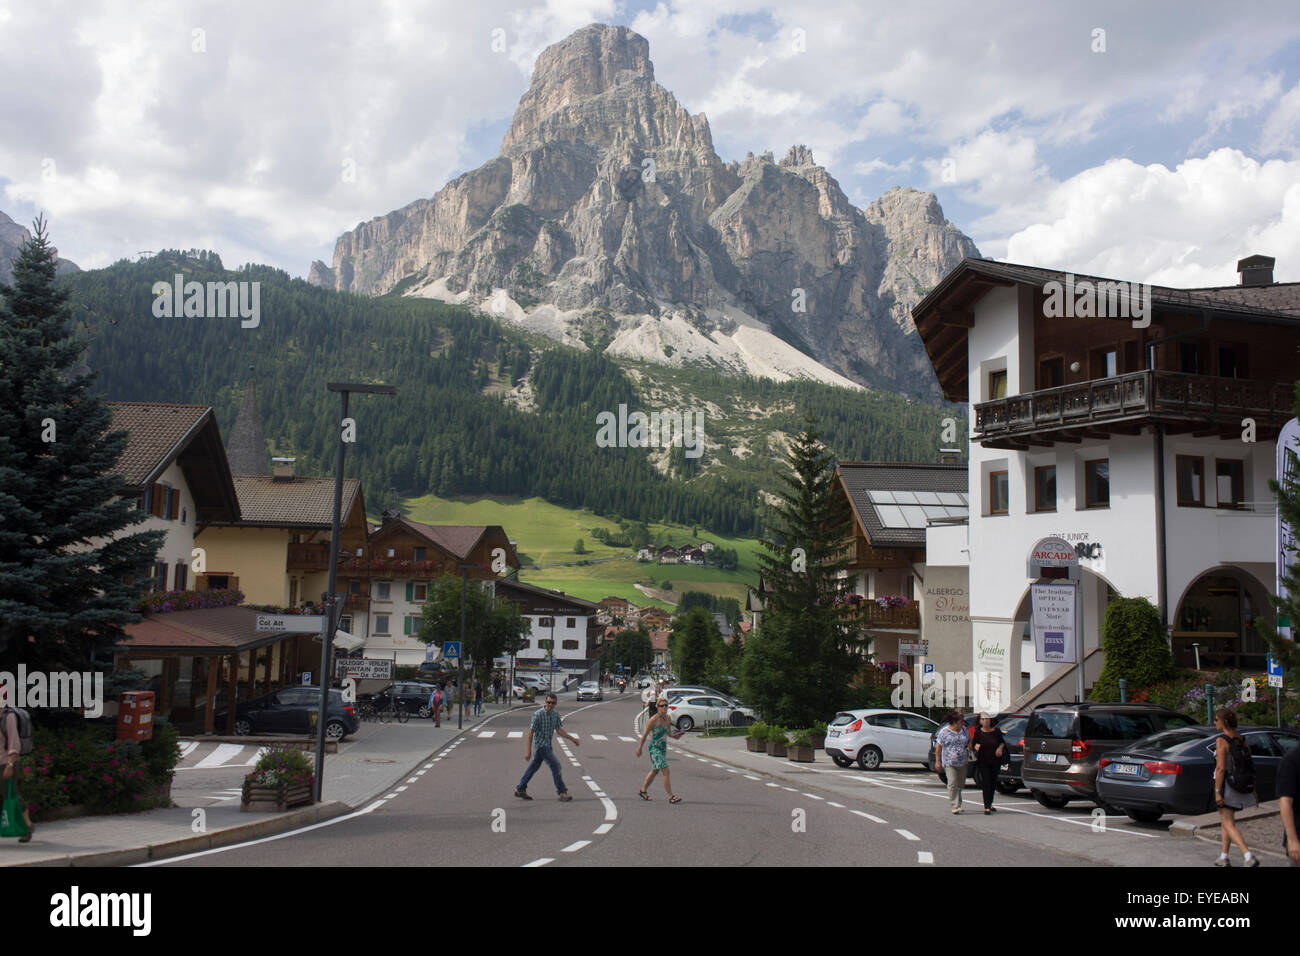 Mount Sassongher (2,665m) in the background of the the Dolomites resort town of Corvara during the summer walking season. Stock Photo